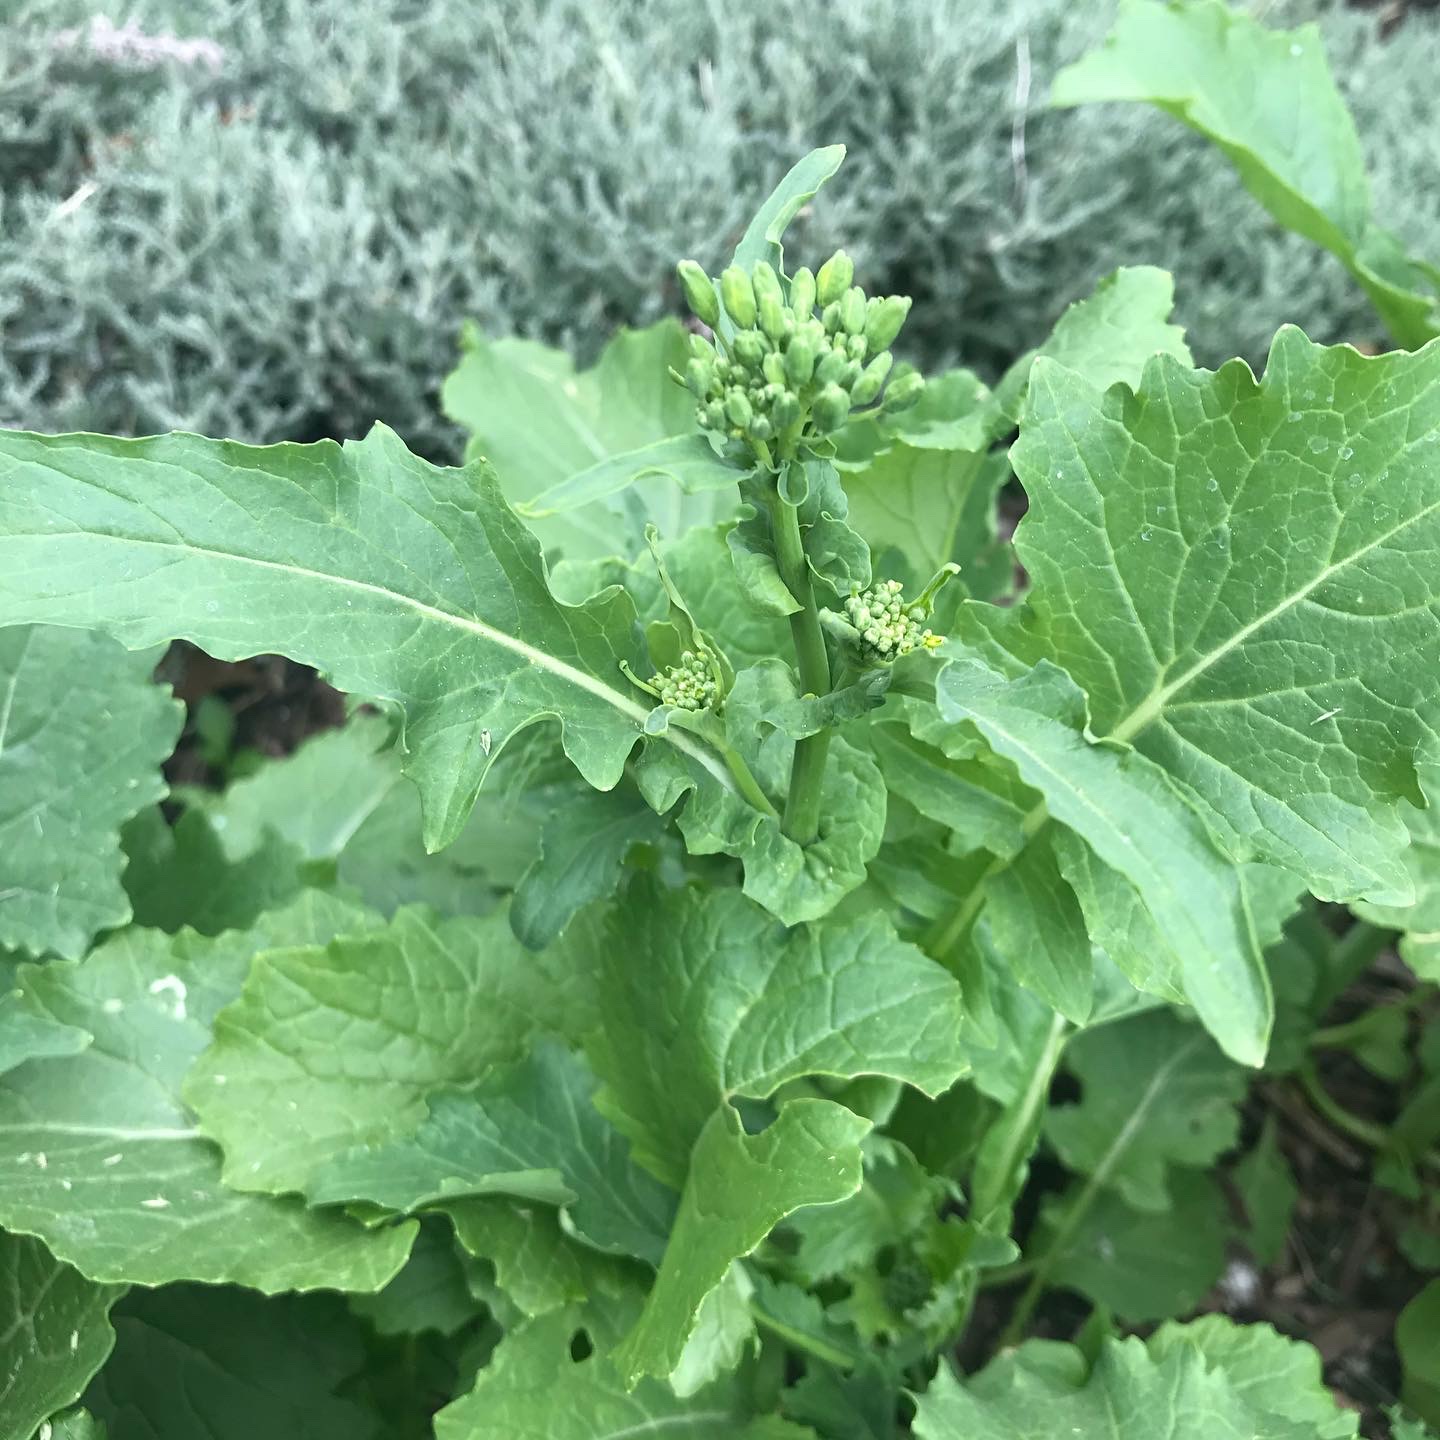 Broccoli rabe close up, ready to harvest before the yellow flowers develop and the plant goes to seed.